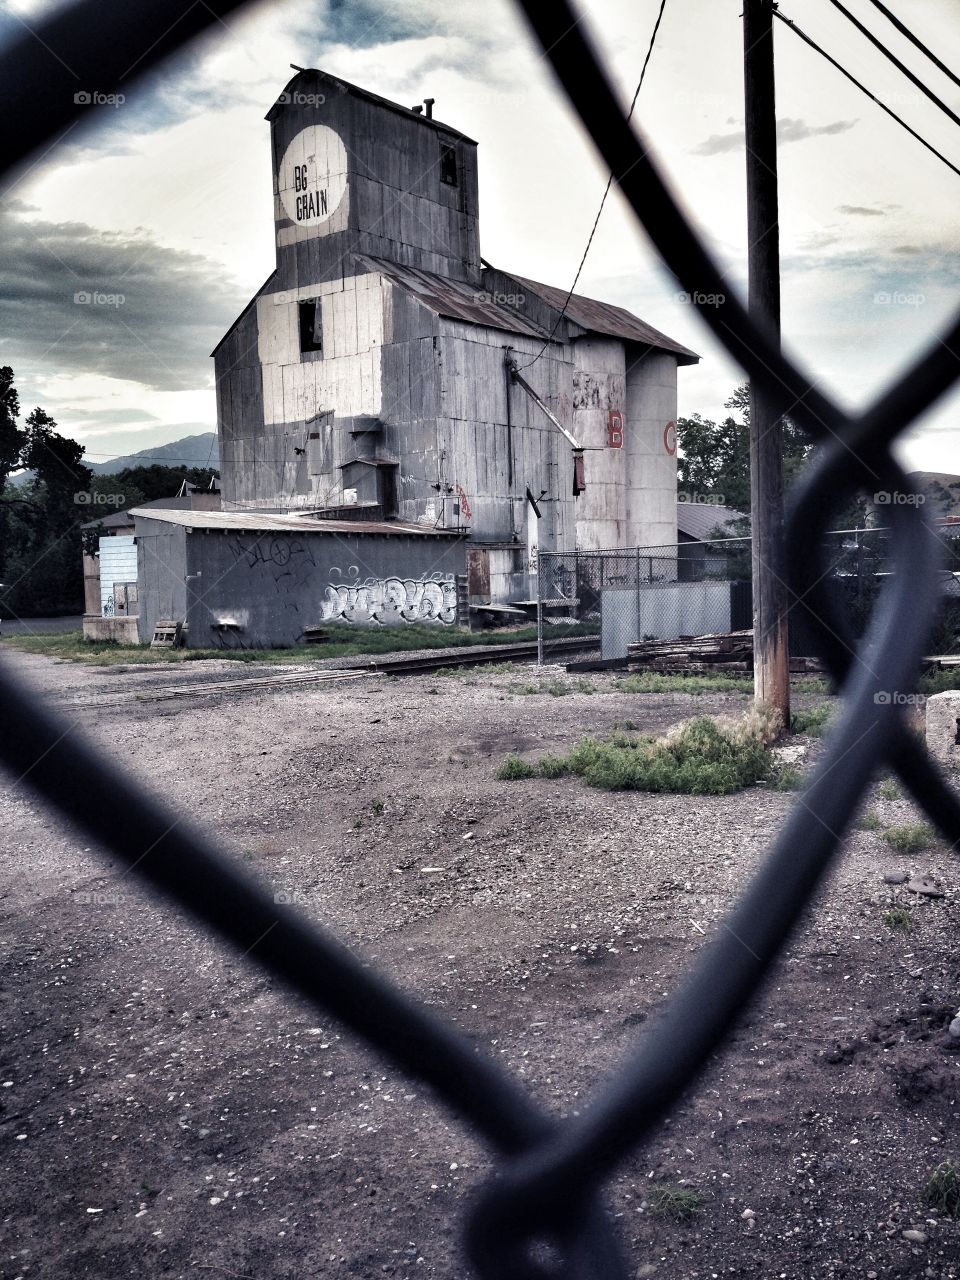 Old Grainery - viewer through a chain link fence